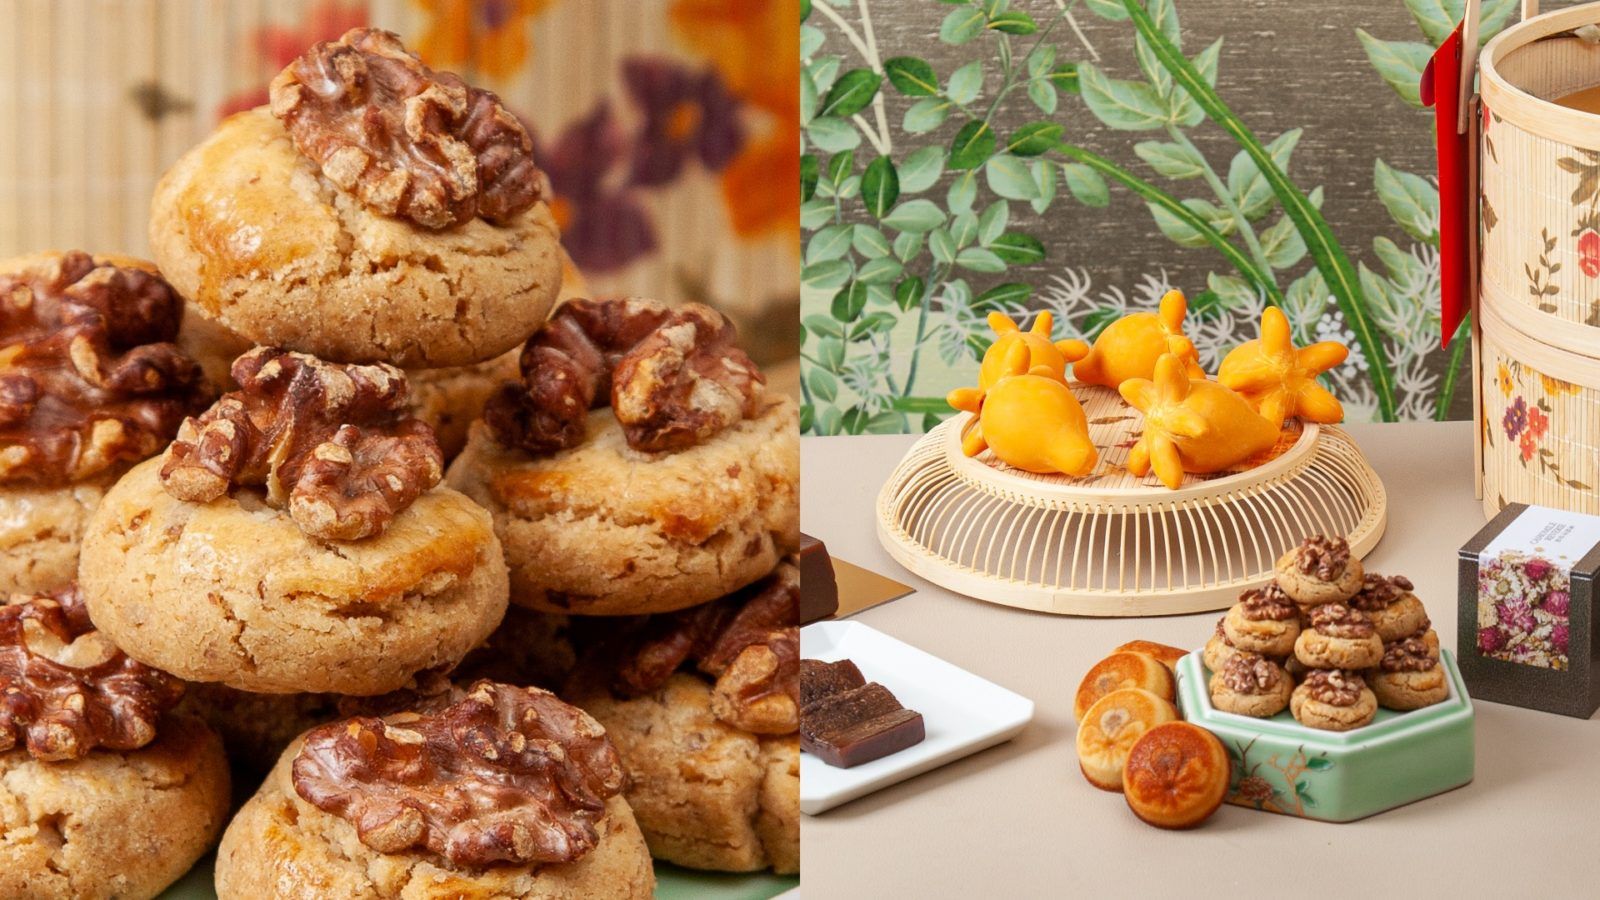 The Home Chef: Date by Tate pastry chef Graff Kwok’s Walnut Pastry recipe